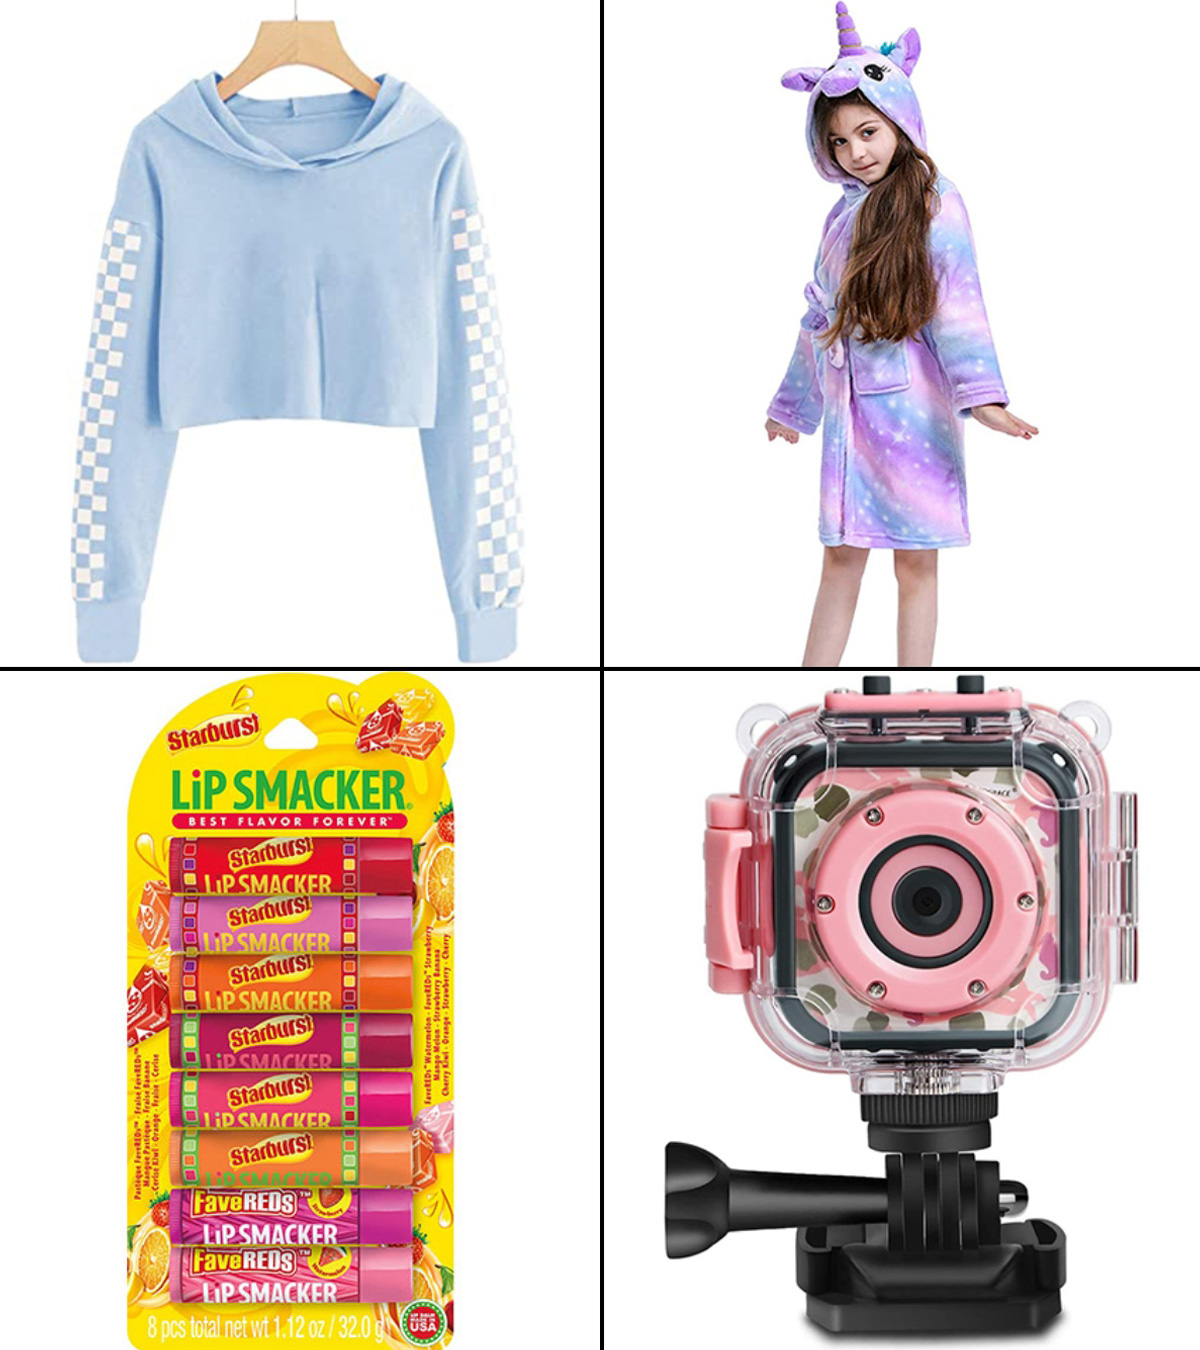 Most Awesome Gifts For 11 Year Old Girls 2021 - ToyBuzz